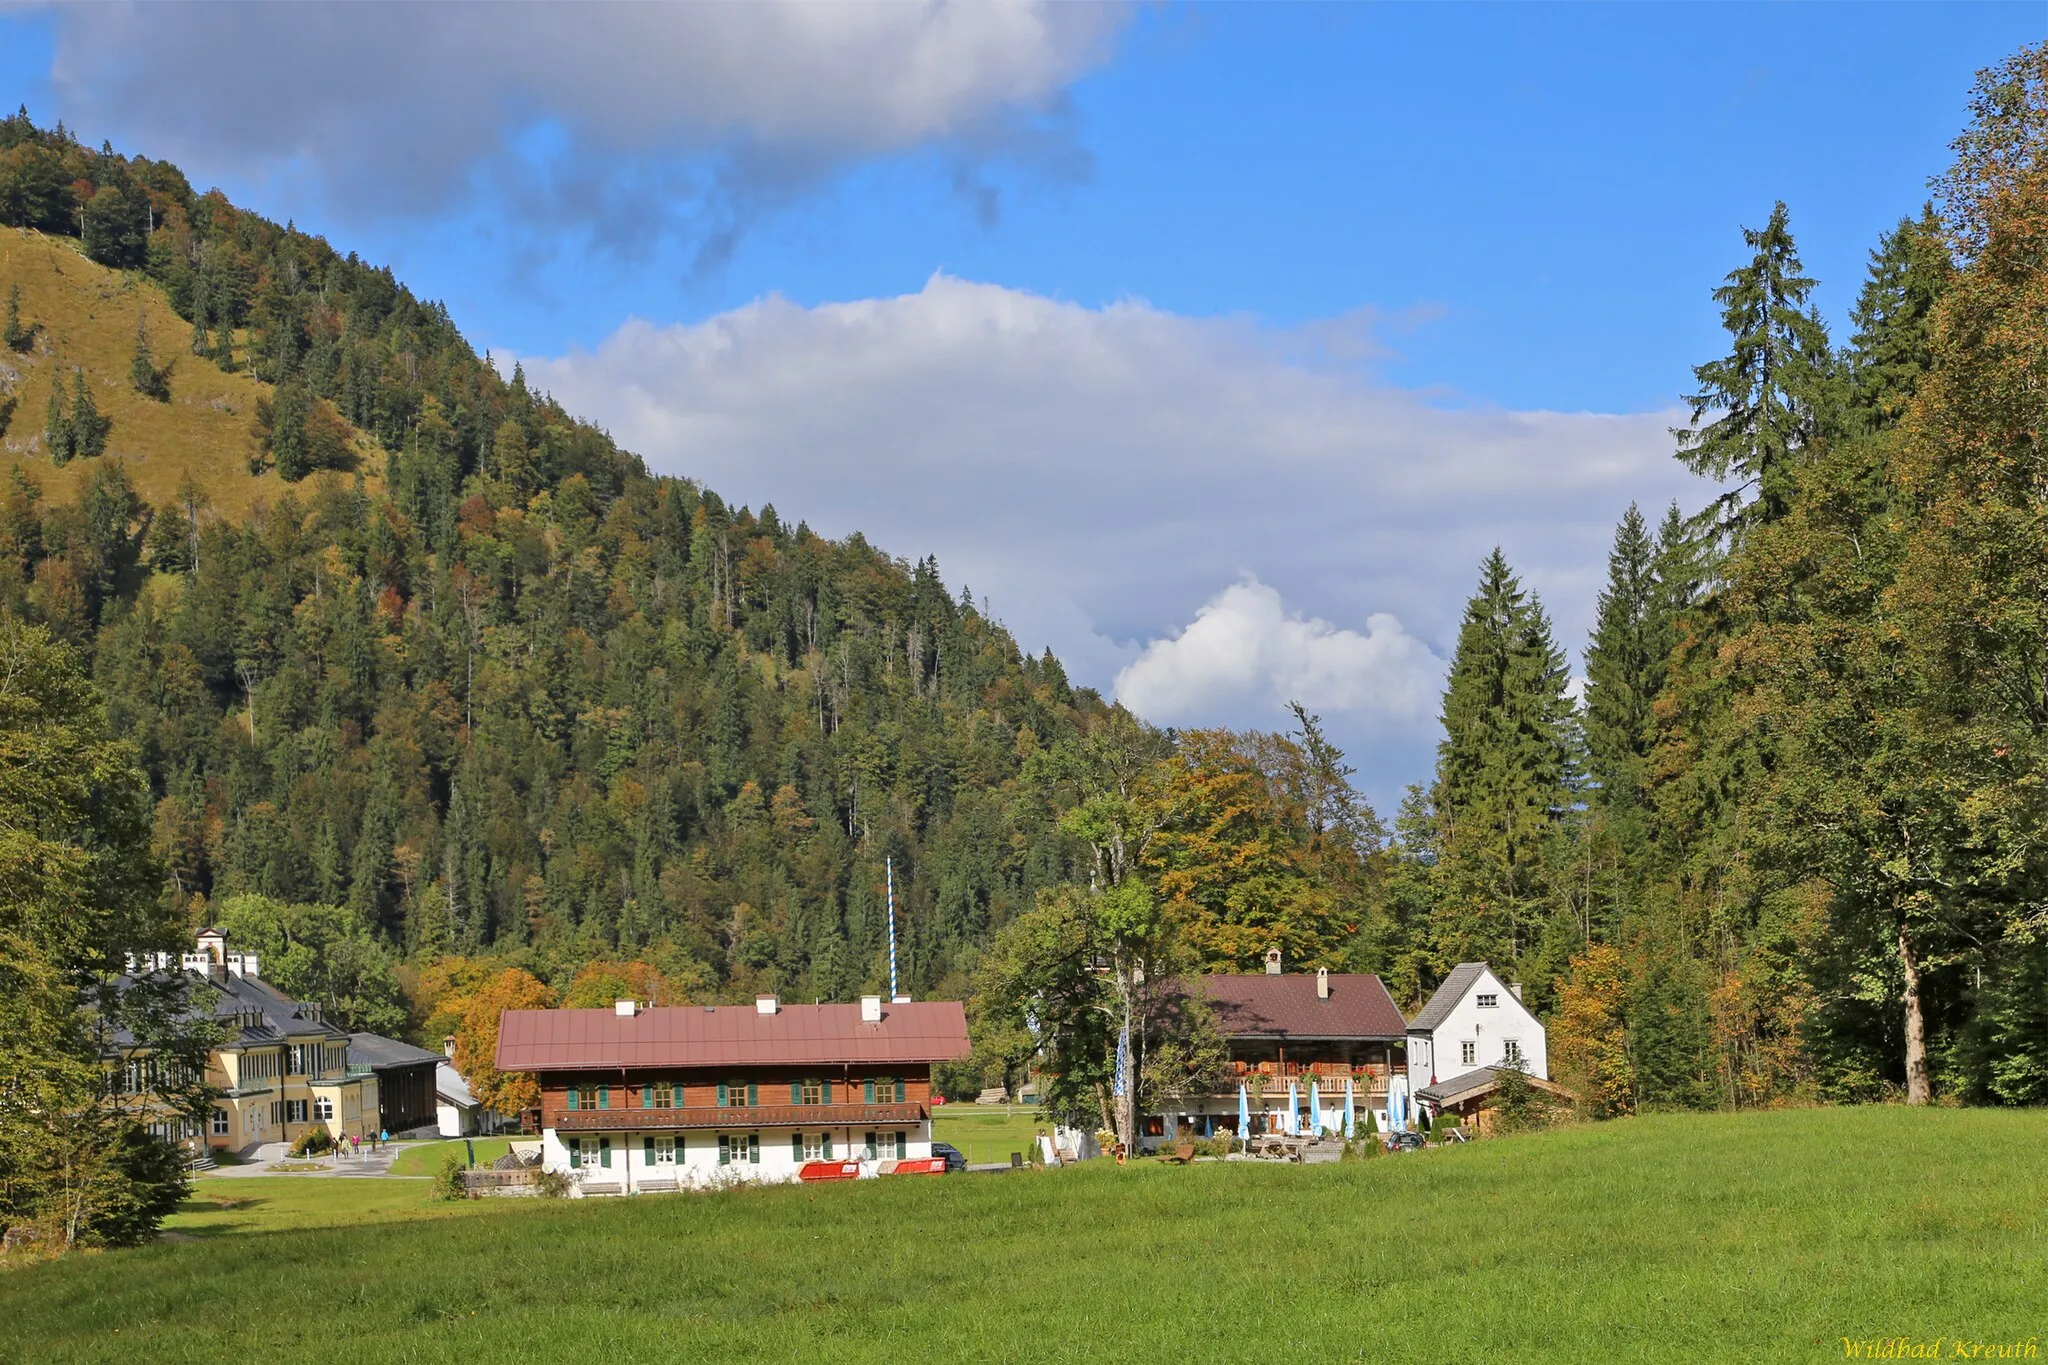 Photo showing: Wildbad Kreuth - a former spa resort is located near Tegernsee and is a district of Kreuth (Germany).